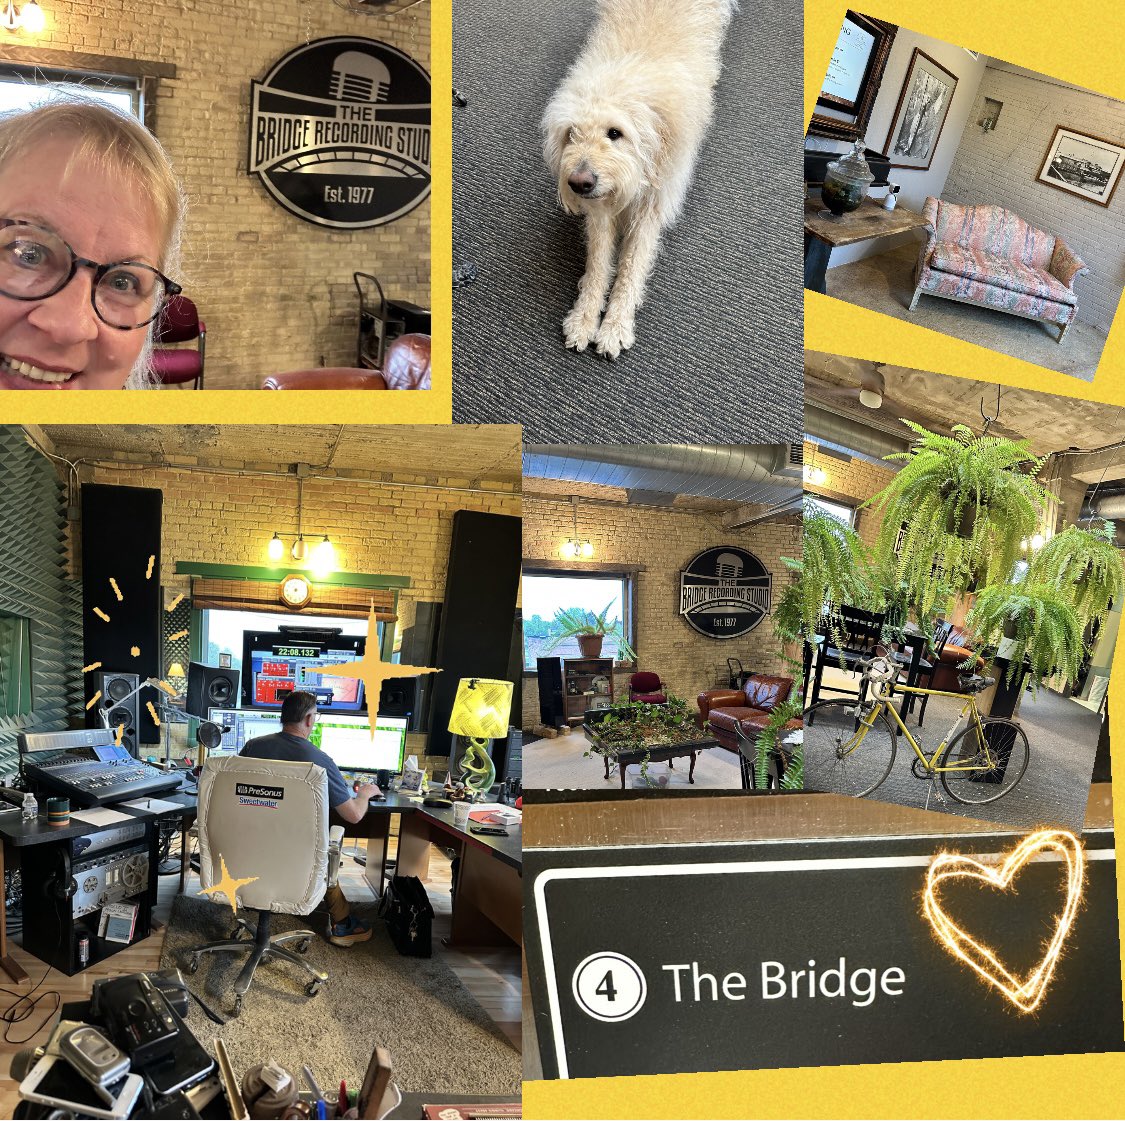 Carl Romey and The Bridge have such a cool recording studio in Green Bay -love doing audio there (and petting Schubert) LakeGirlPublushing.com #recordingstudio #voiceover #beingethelauthor #voiceactor #voicepro